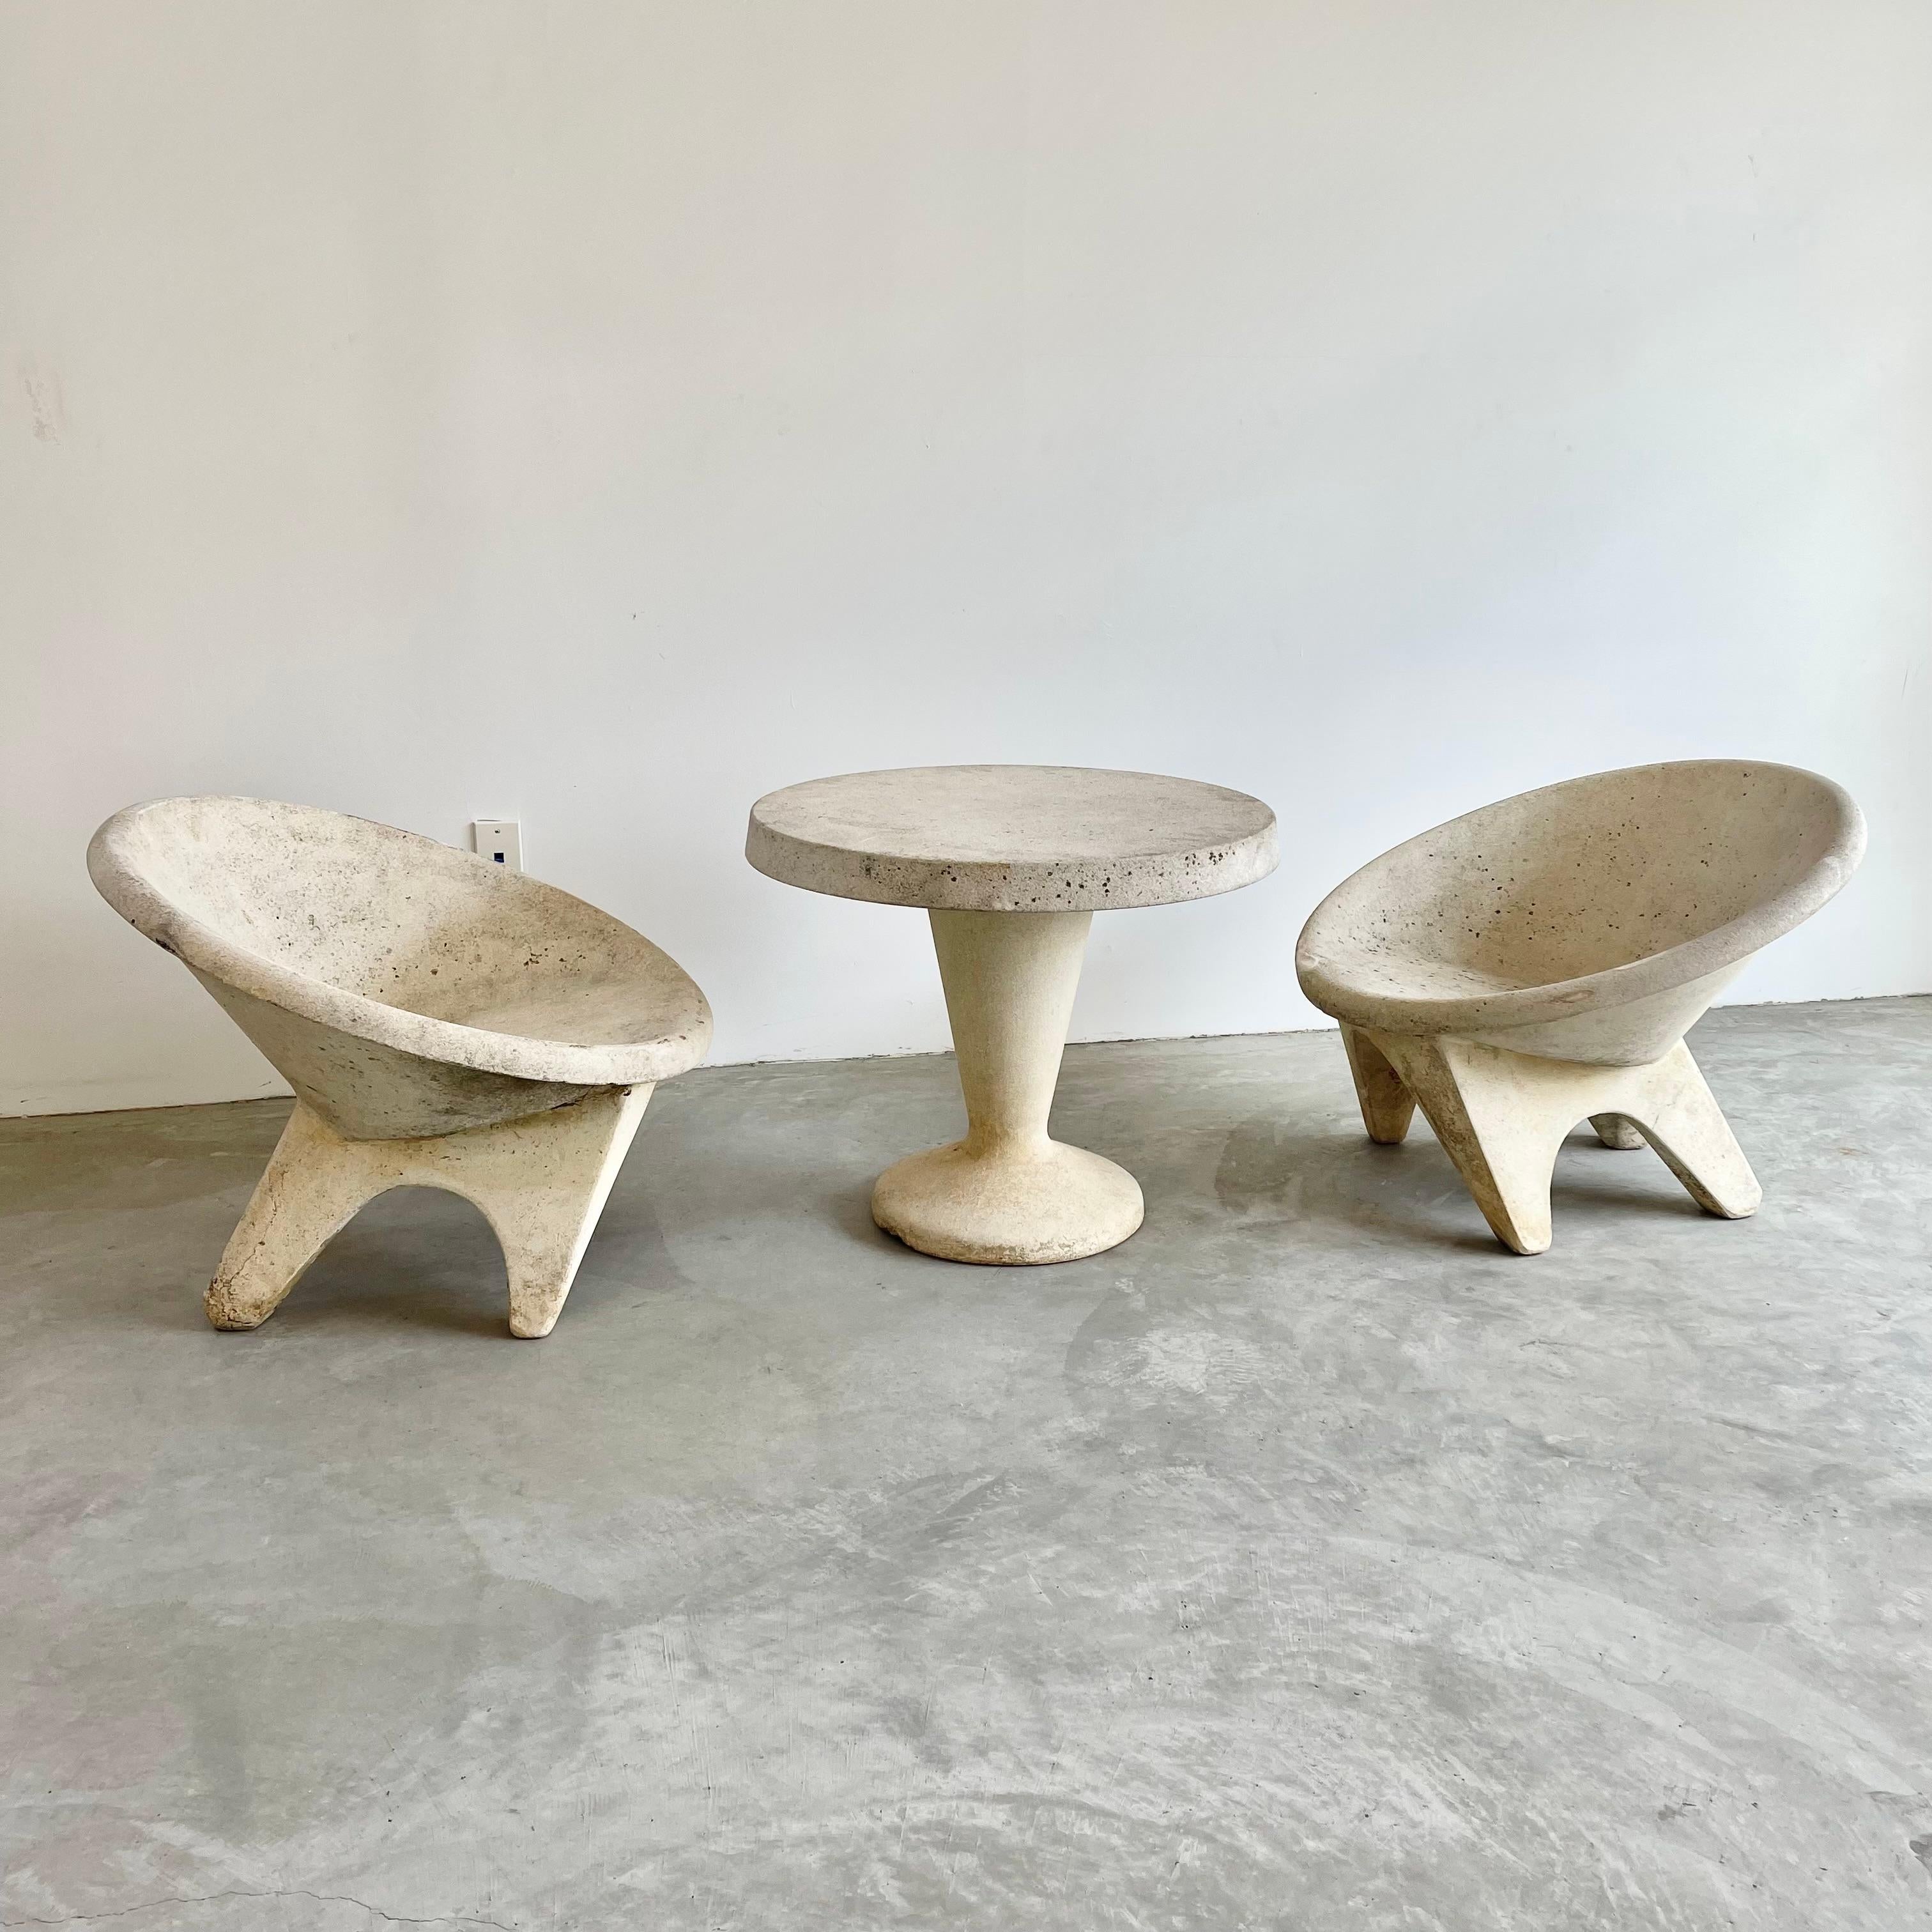 Mid-20th Century Sculptural Concrete Chairs and Table, 1960s Switzerland